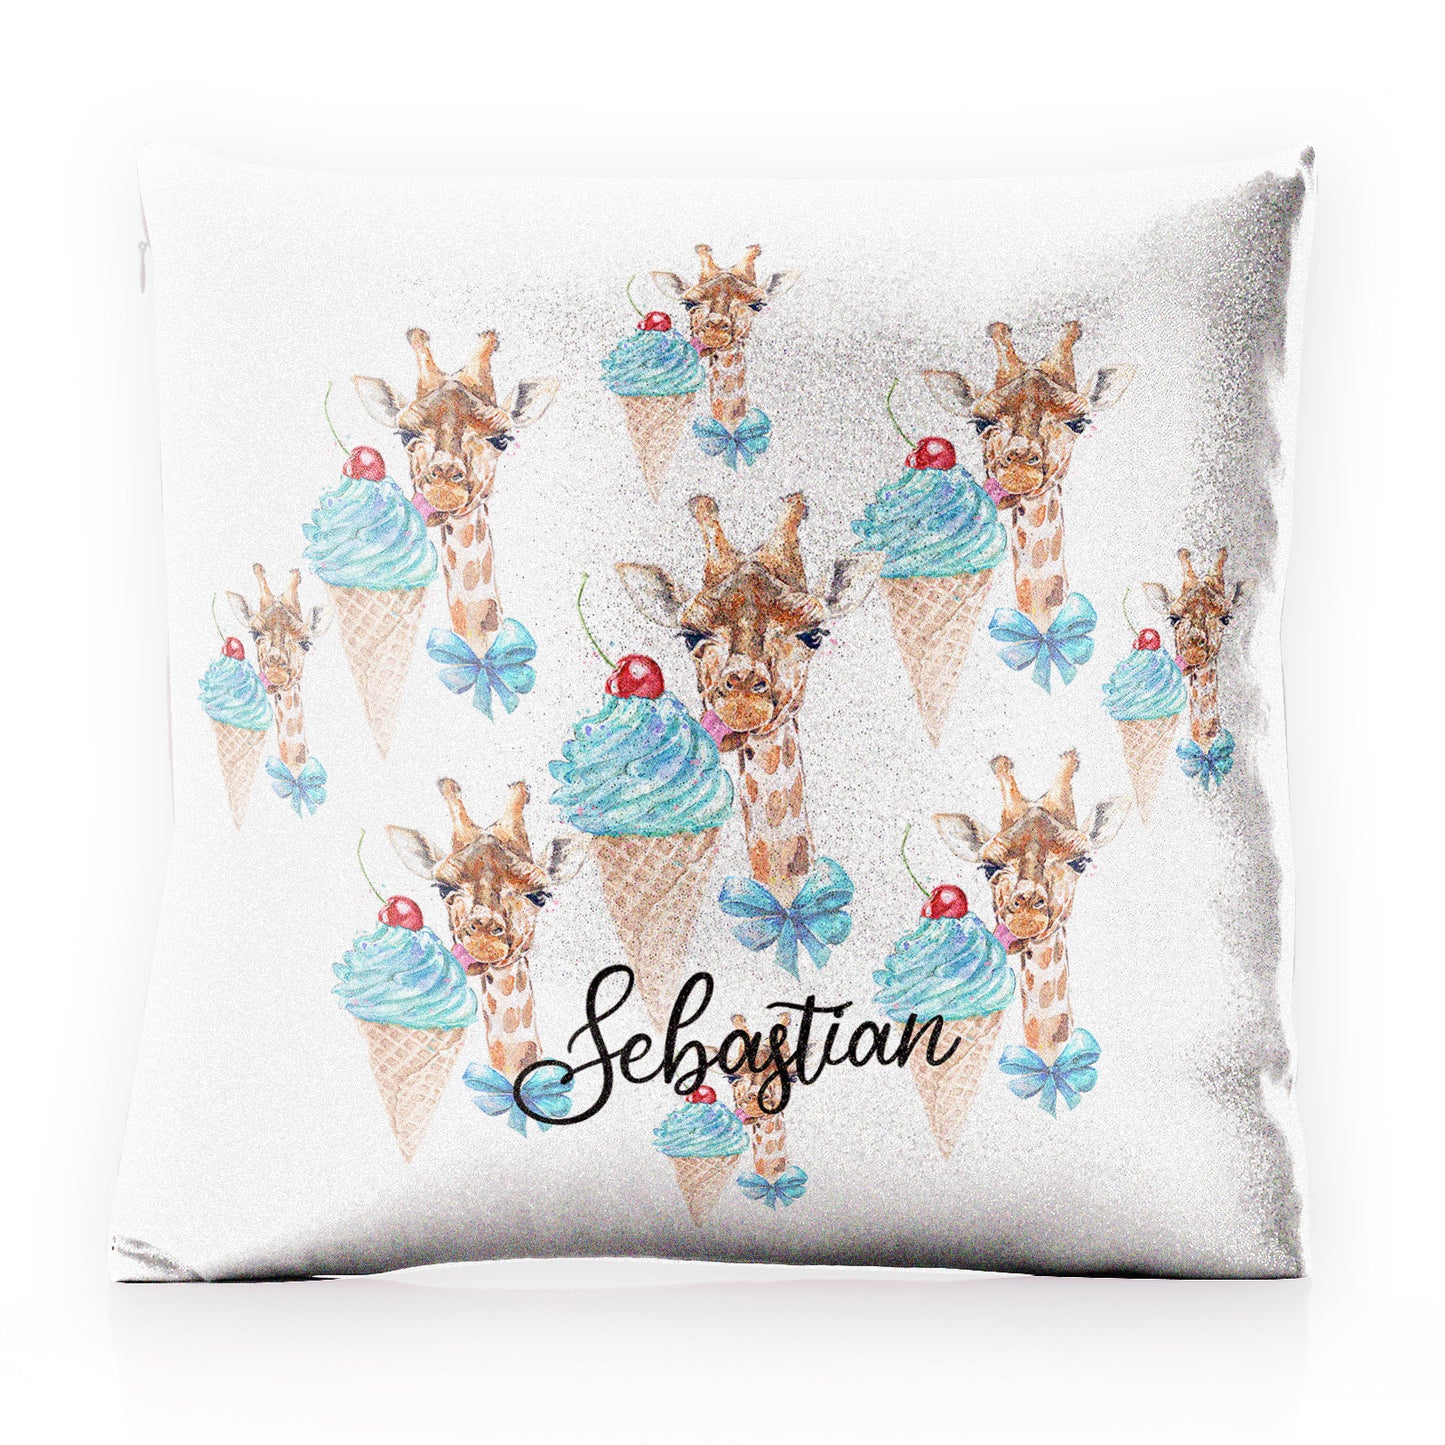 Personalised Glitter Cushion with Giraffe Blue Ice creams and Cute Text